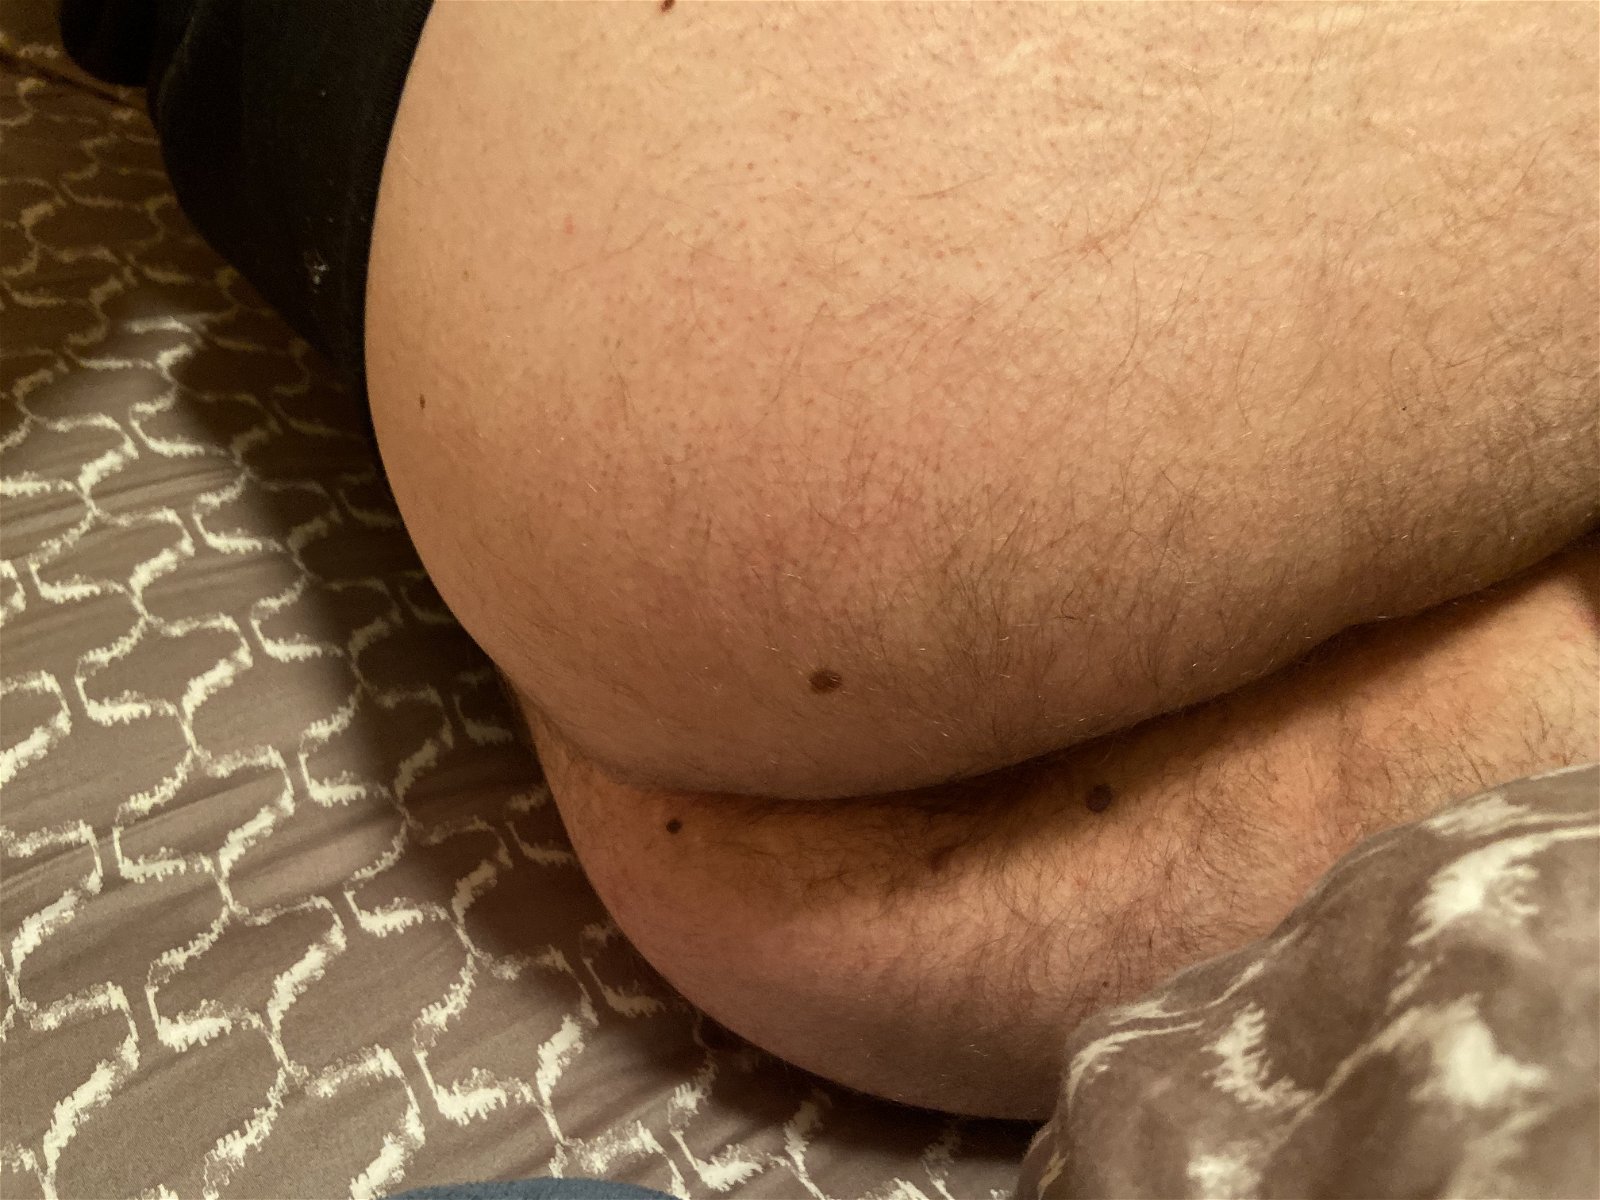 Photo by thebi-yeti with the username @thebi-yeti, who is a verified user,  November 17, 2019 at 2:26 AM and the text says 'Feelin weird.. here’s my bum'